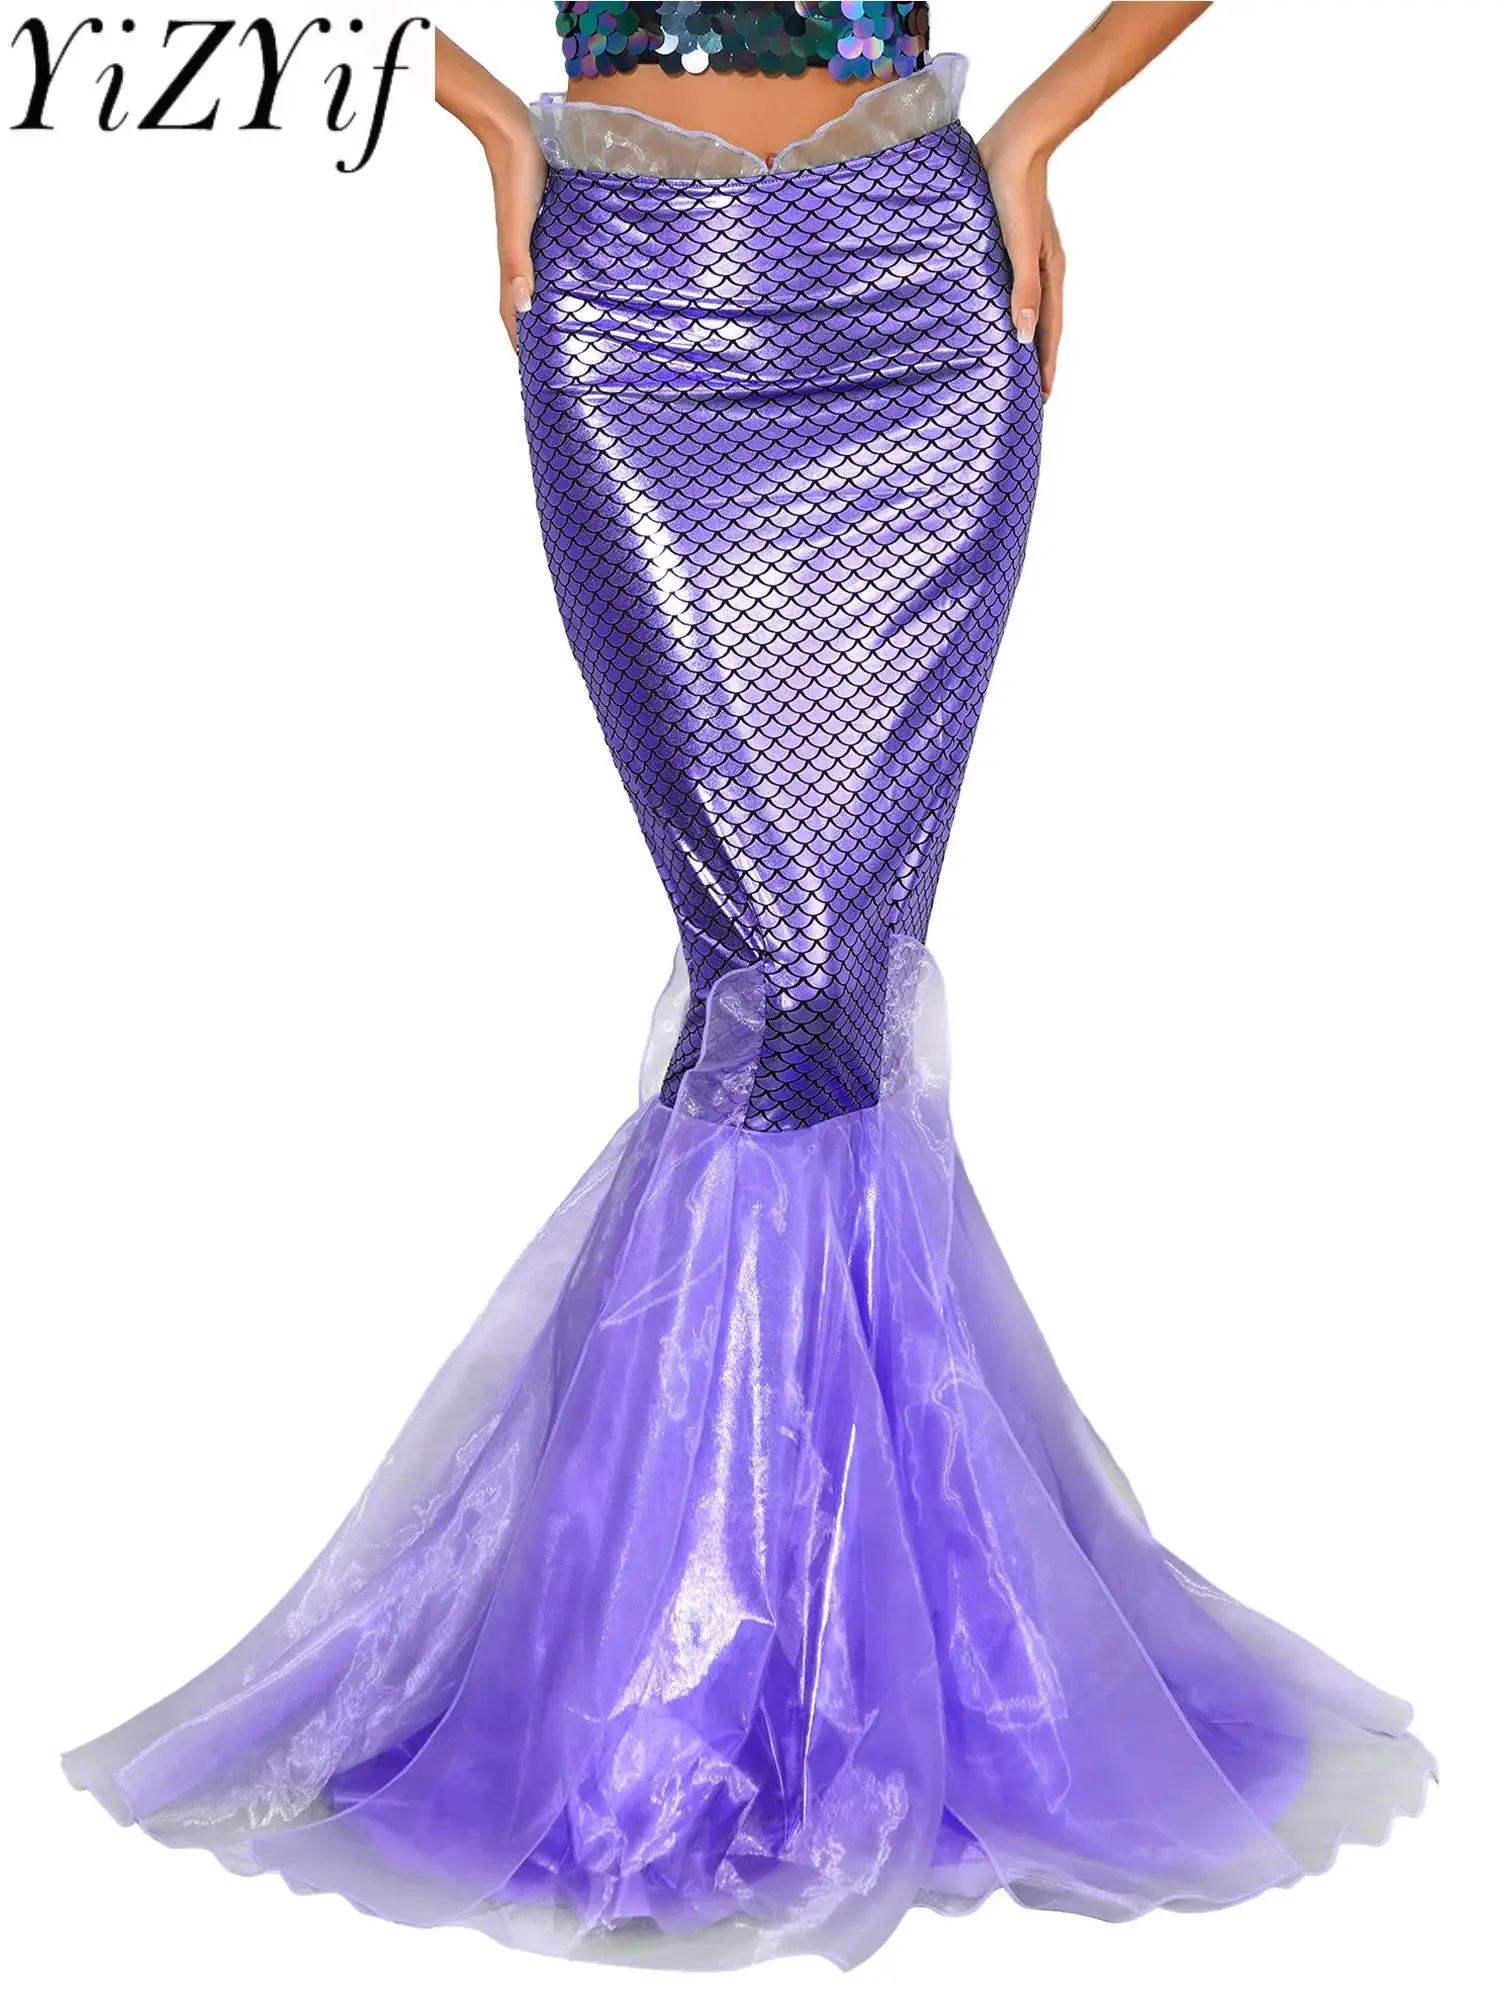 

Womens Halloween Mermaid Maxi Skirt Cascading Tulle Fish Scale Print Shiny Fishtail Skirt Princess Cosplay Party Fancy Dress-Up